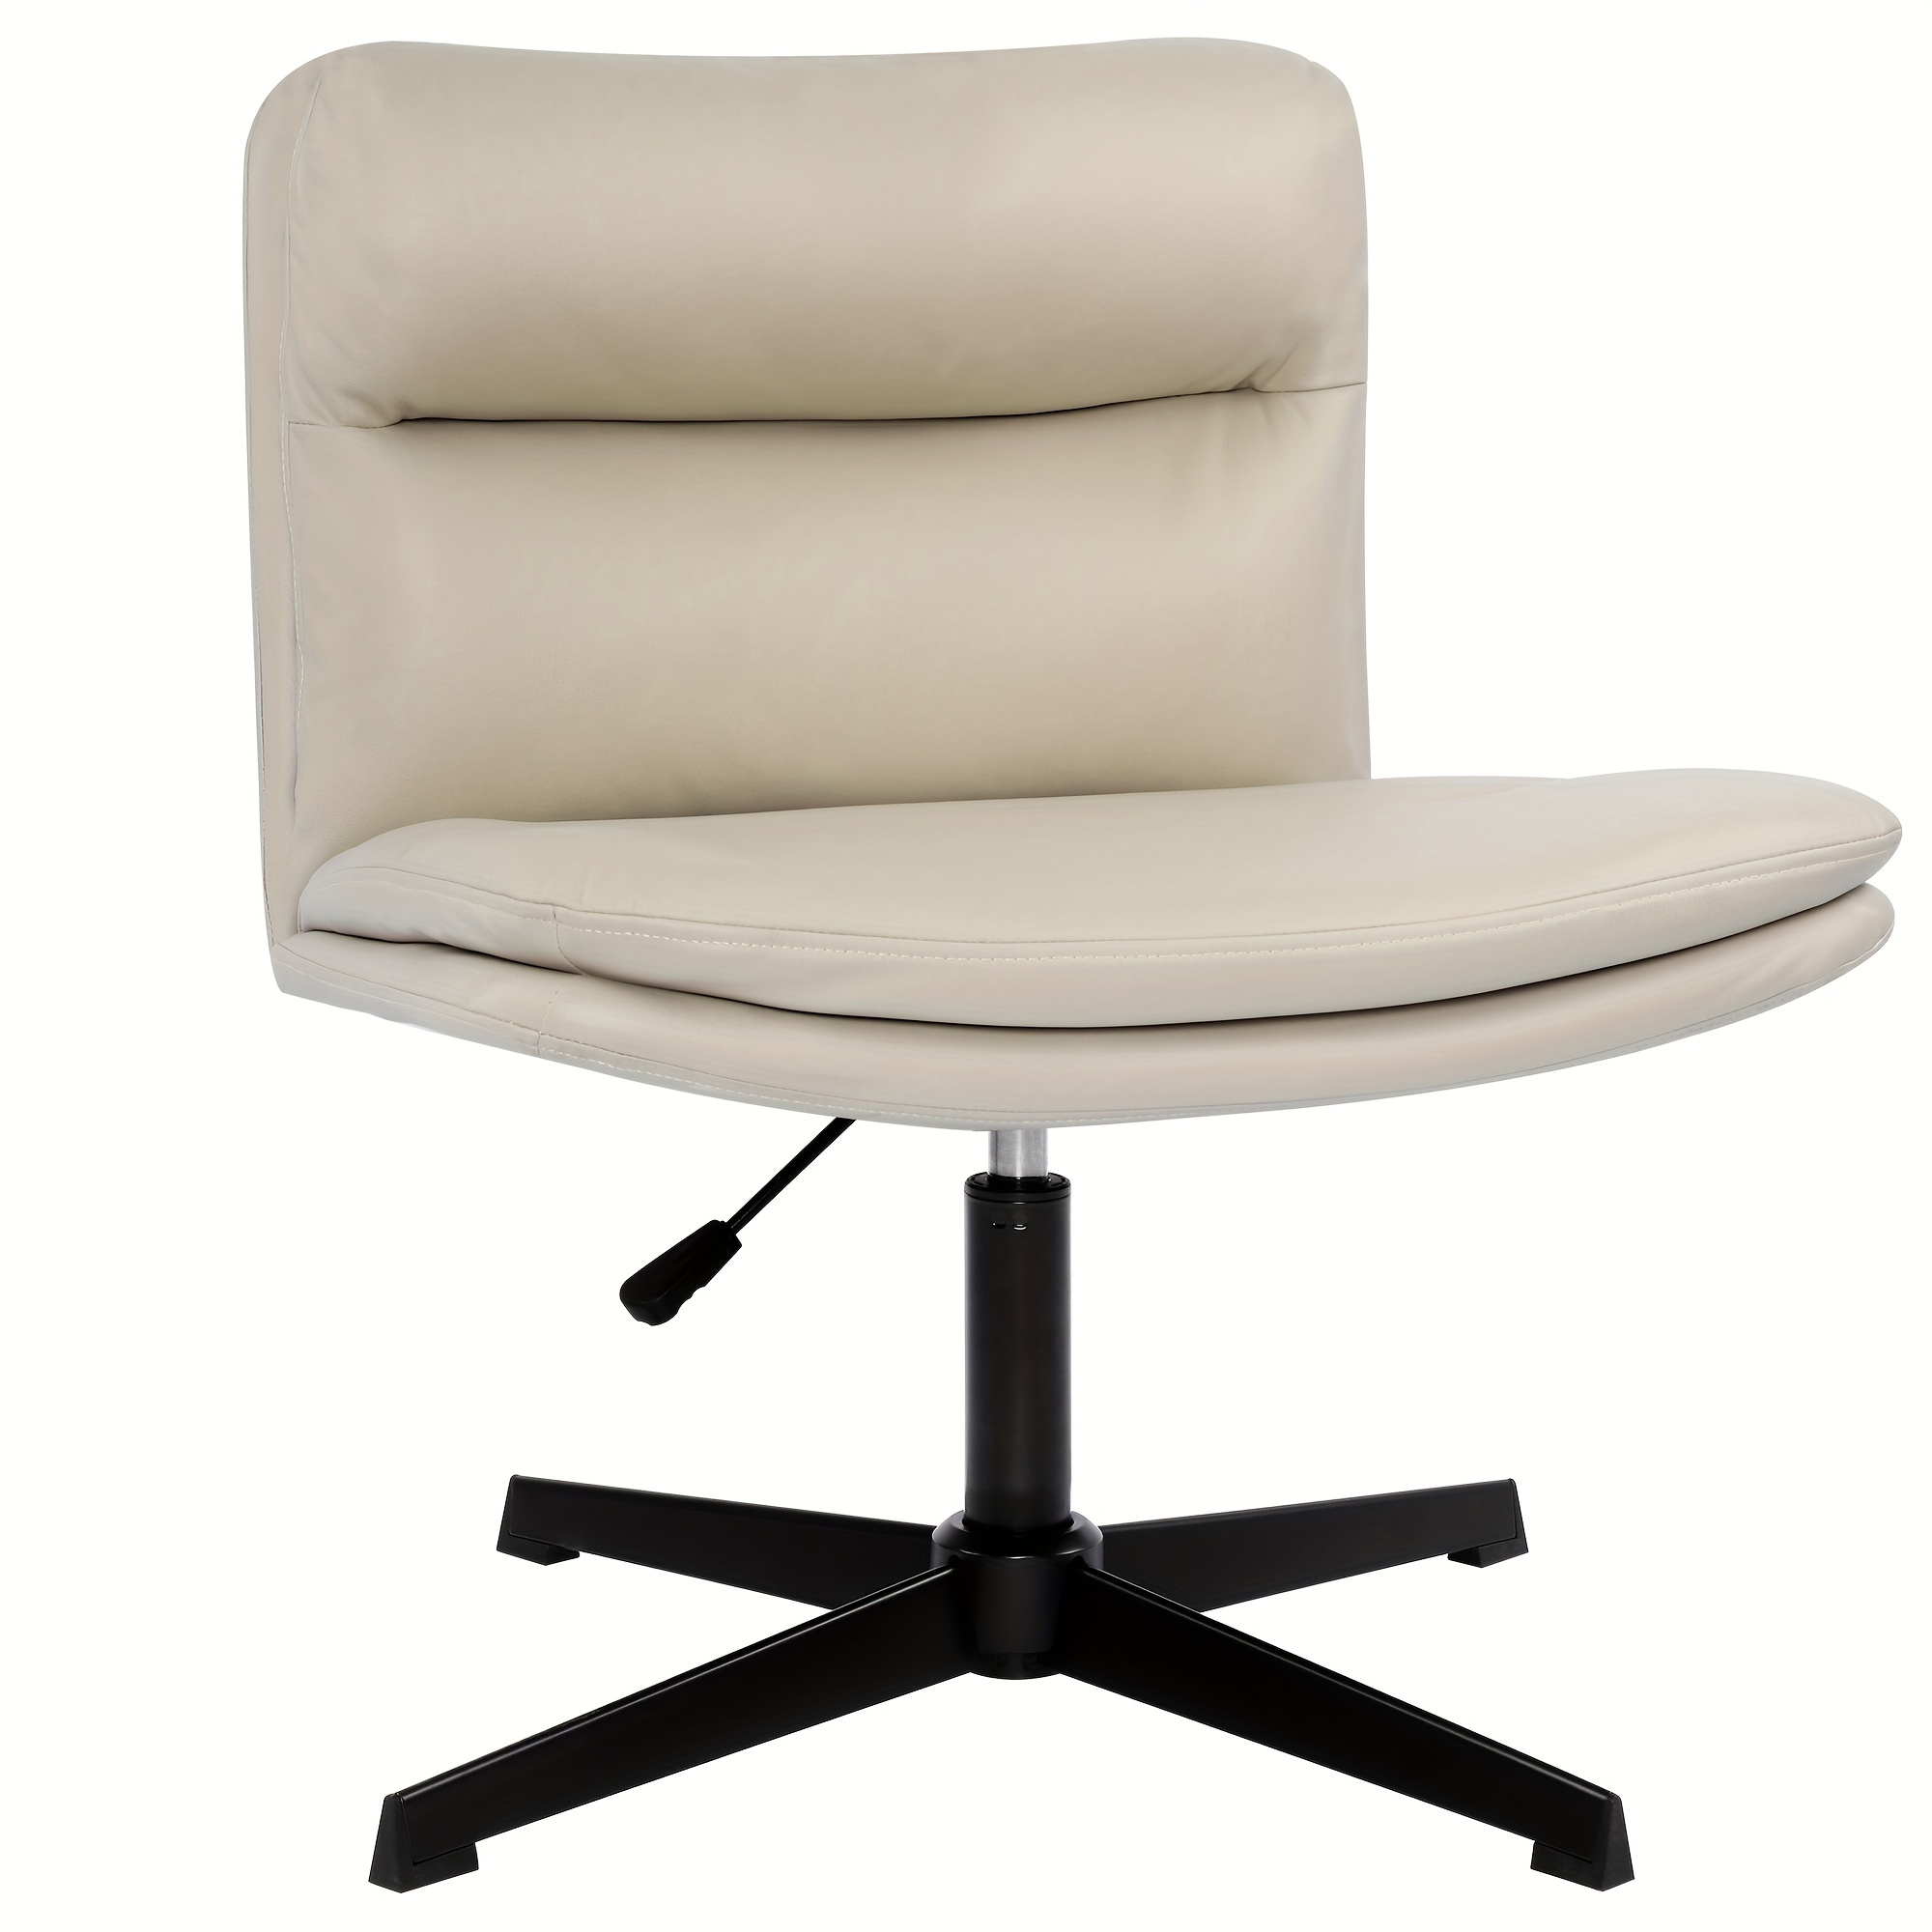 

Armless Office Desks Chair, Upholstered Pu Leather Accent Chair, Mid-back Ergonomic Home Office Computer Chair Comfortable Adjustable Swivel Task Chair, Beige